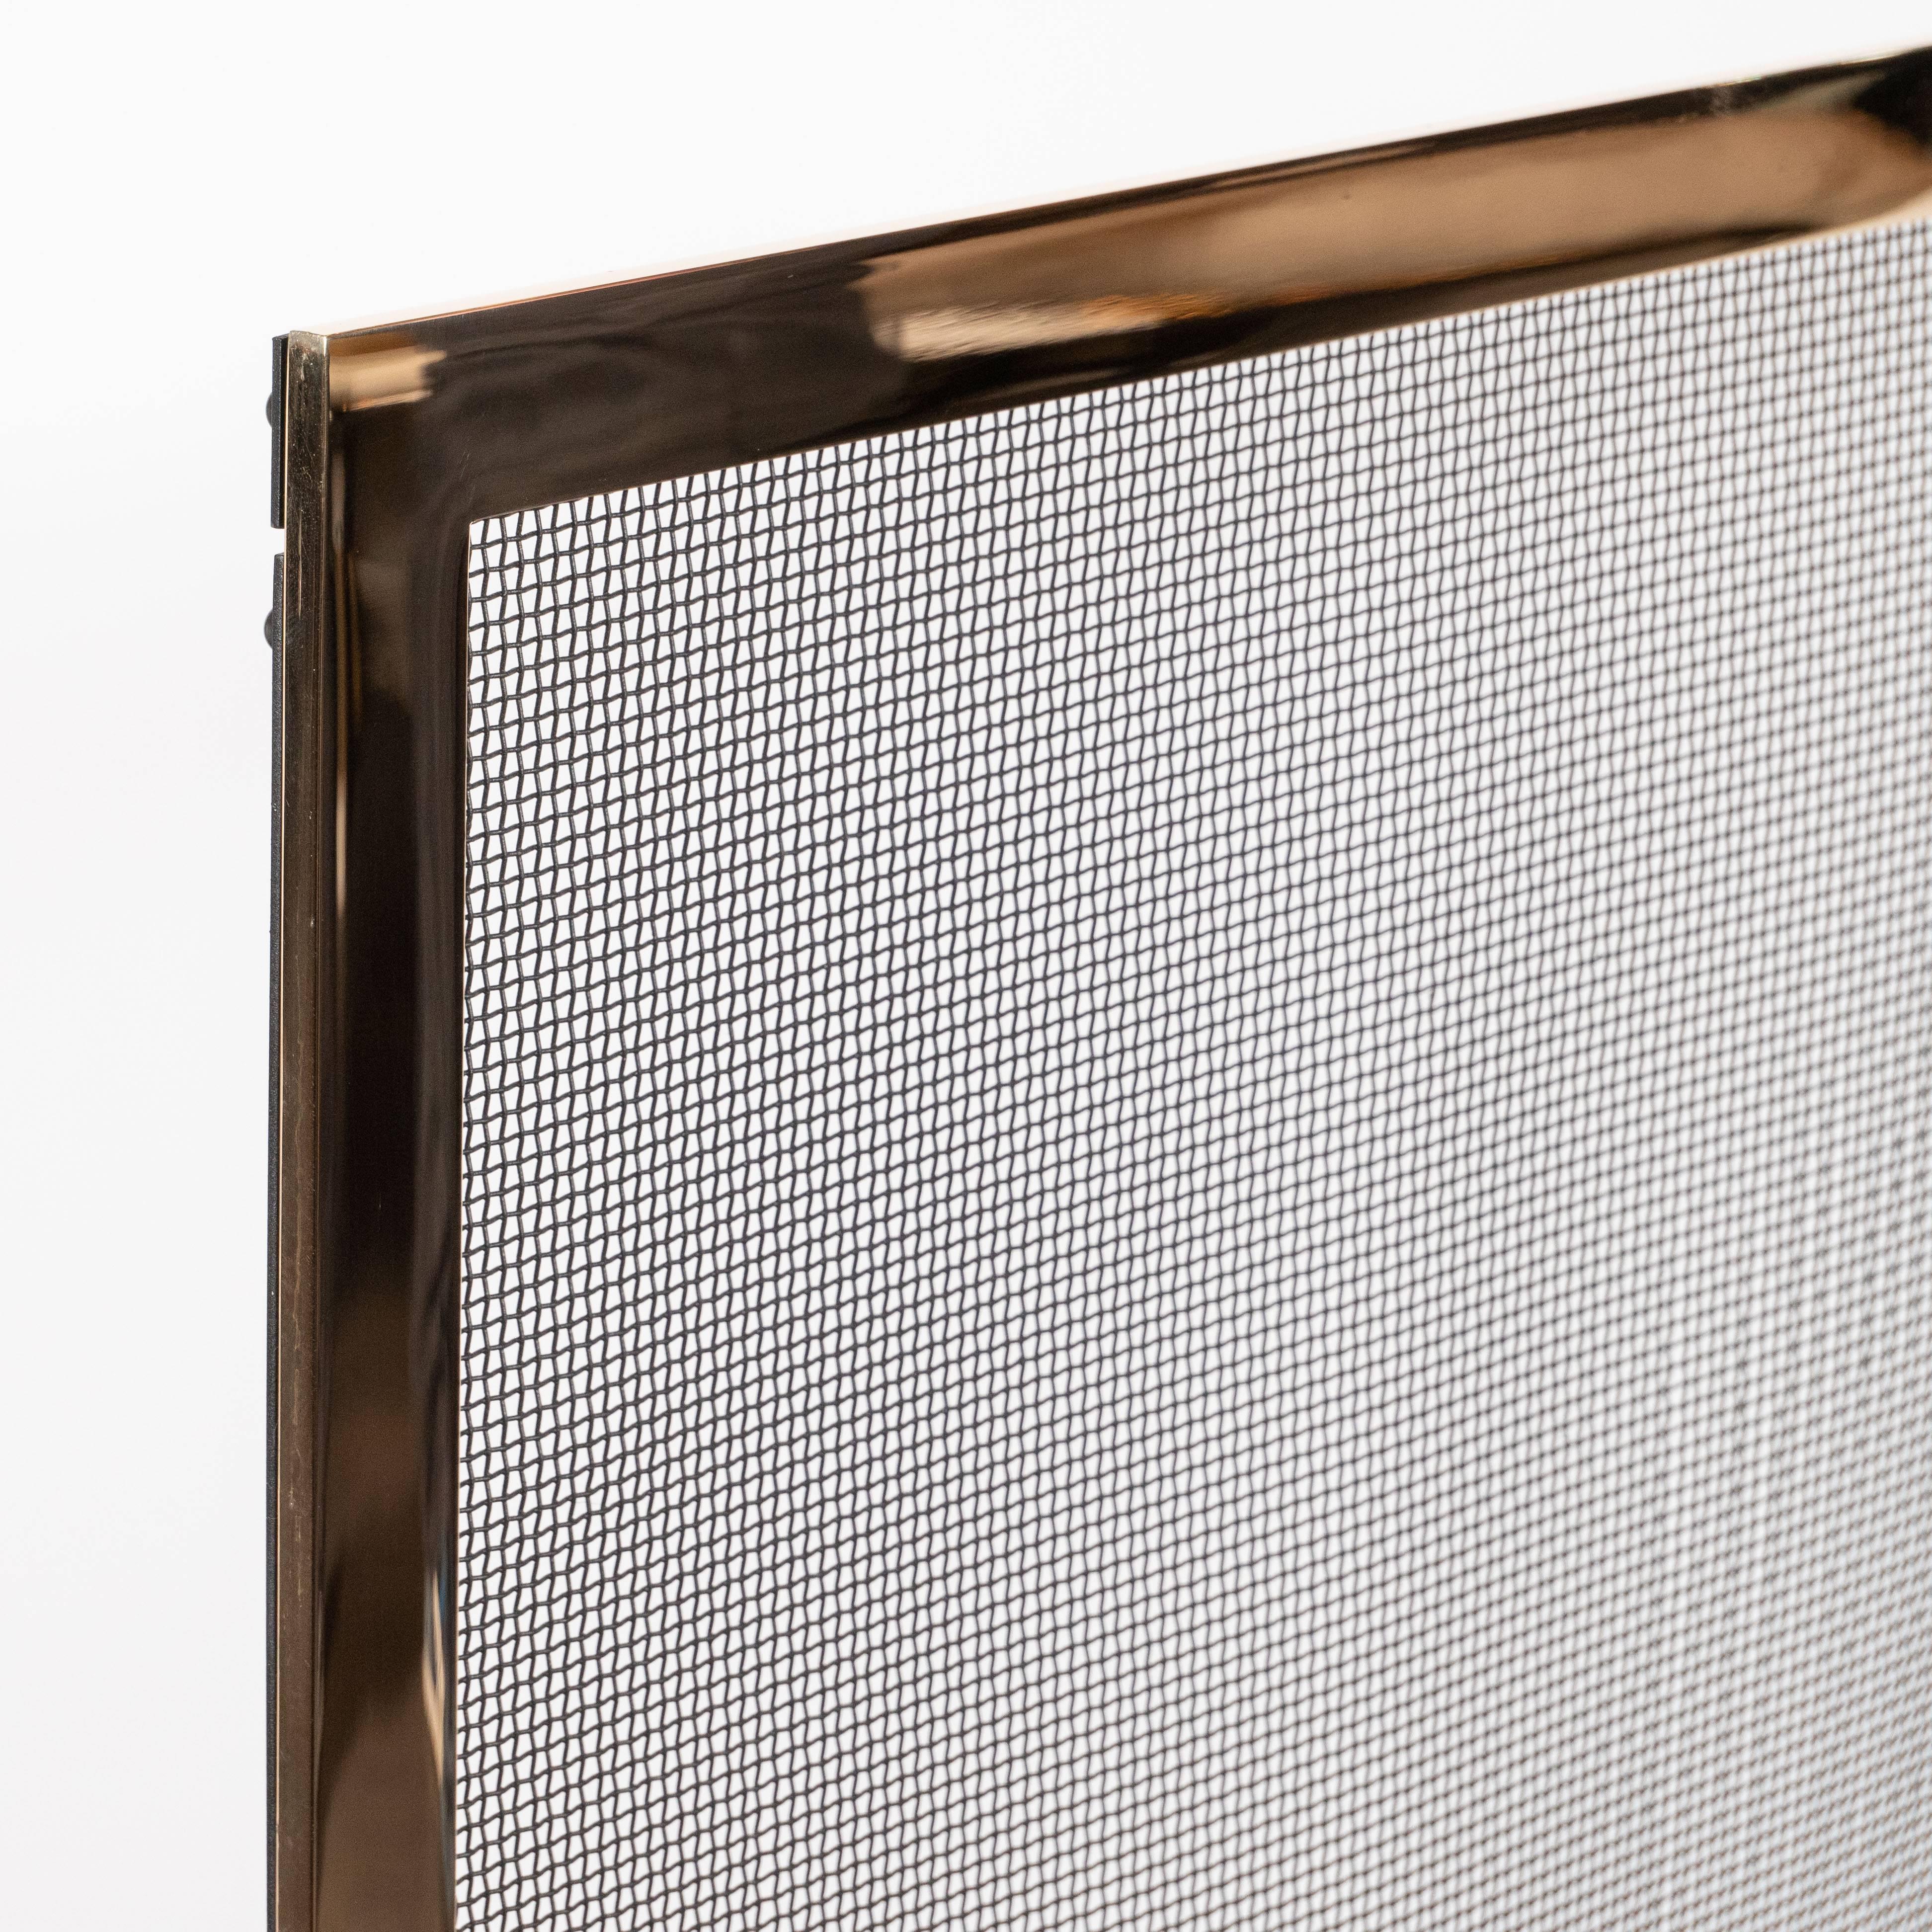 American Custom Modernist Fire Screen in Polished Brass with Iron Mesh Grill